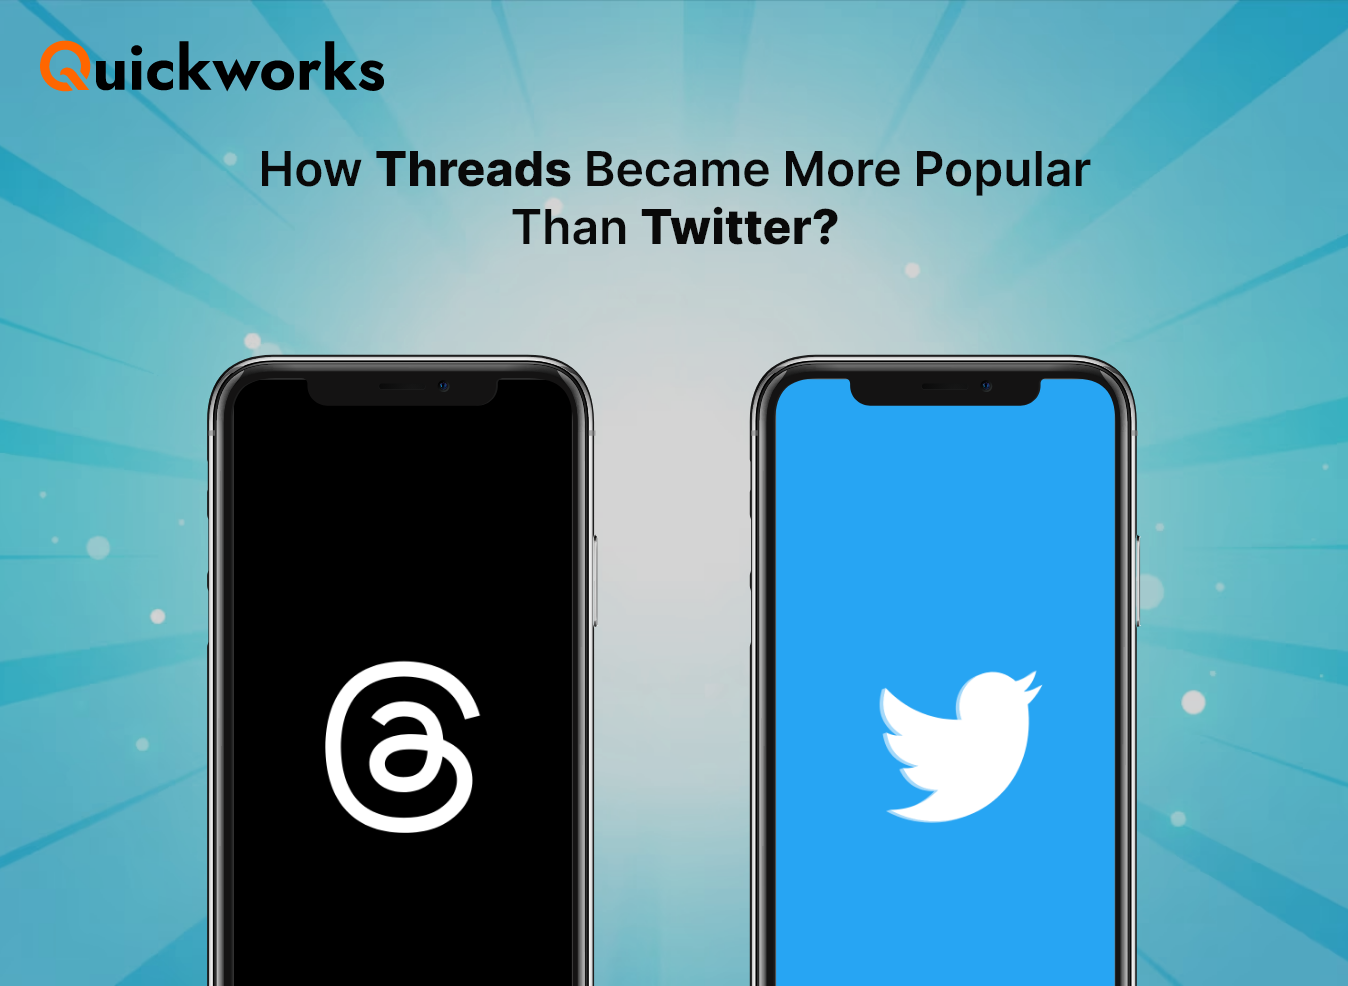 Threads and Twitter